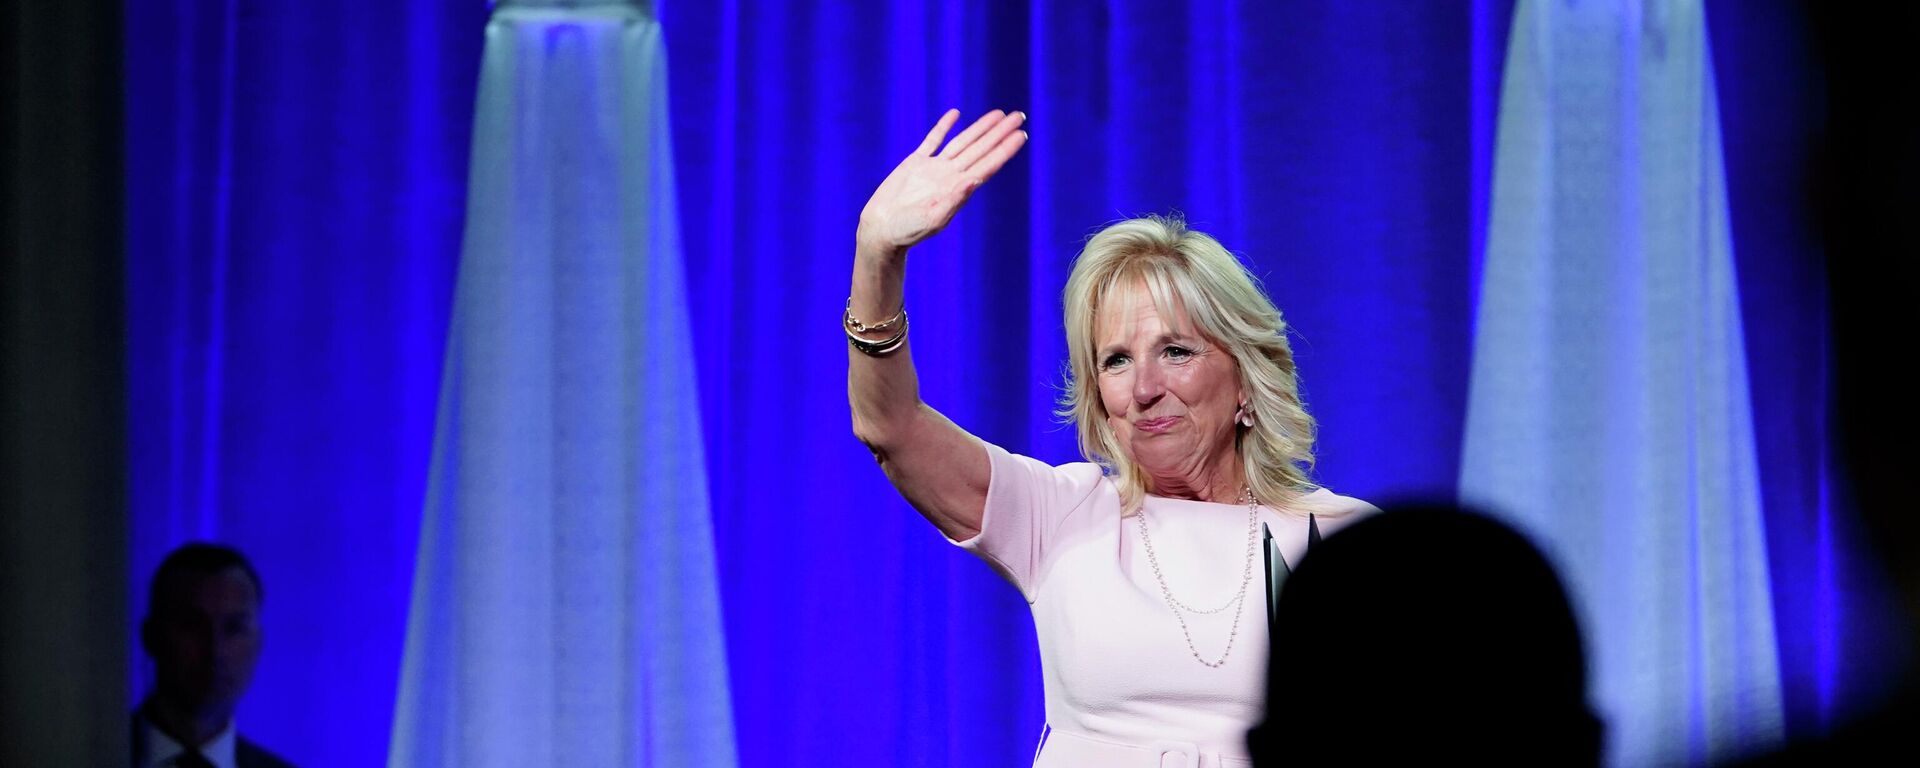 First lady Jill Biden waves to the audience after speaking at the 125th Anniversary Convention of the National Parent Teacher Association (PTA) in National Harbor, Md., Friday, June 17, 2022. - Sputnik International, 1920, 12.07.2022